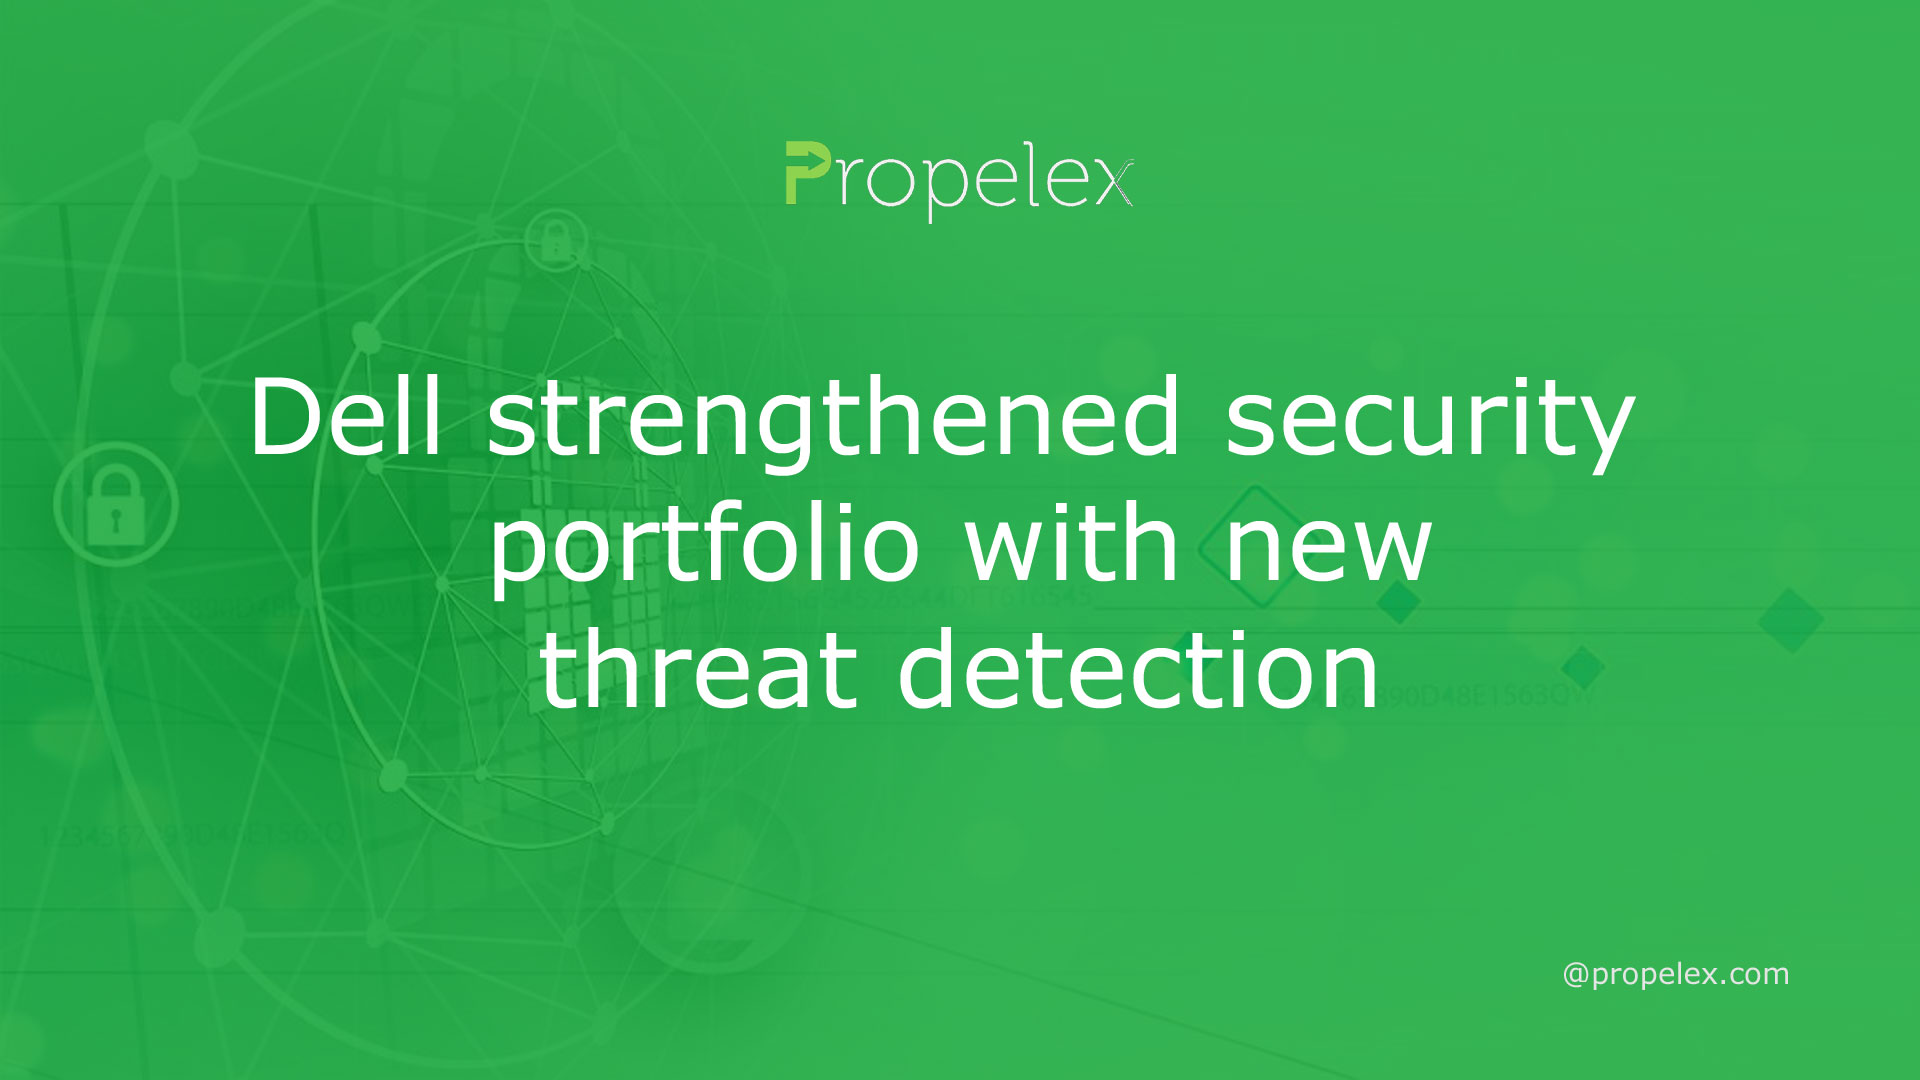 Dell strengthened security portfolio with threat detection